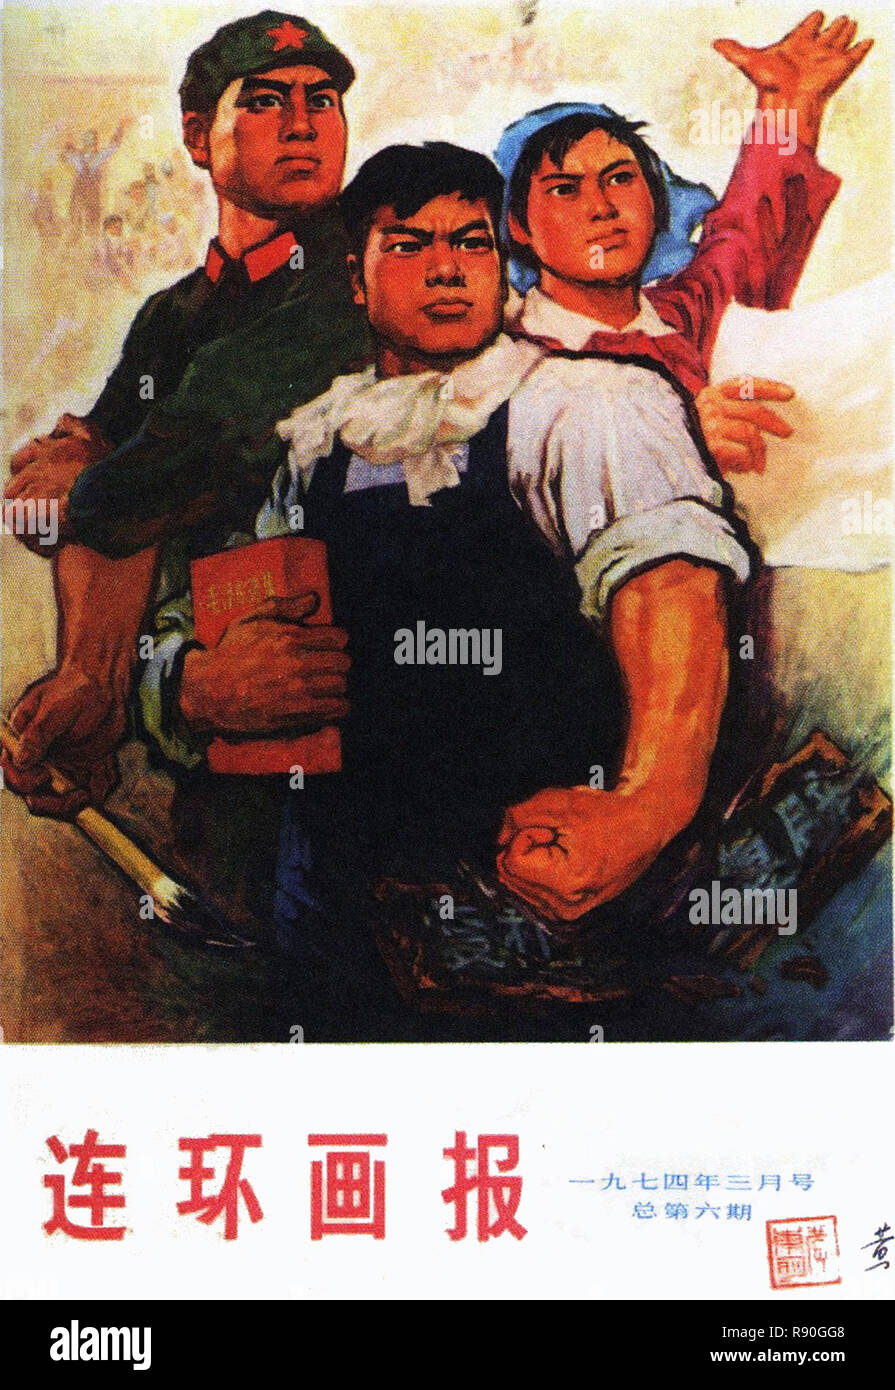 Chinese Workers - Vintage U.S.S.R Communist Propaganda Poster Stock Photo